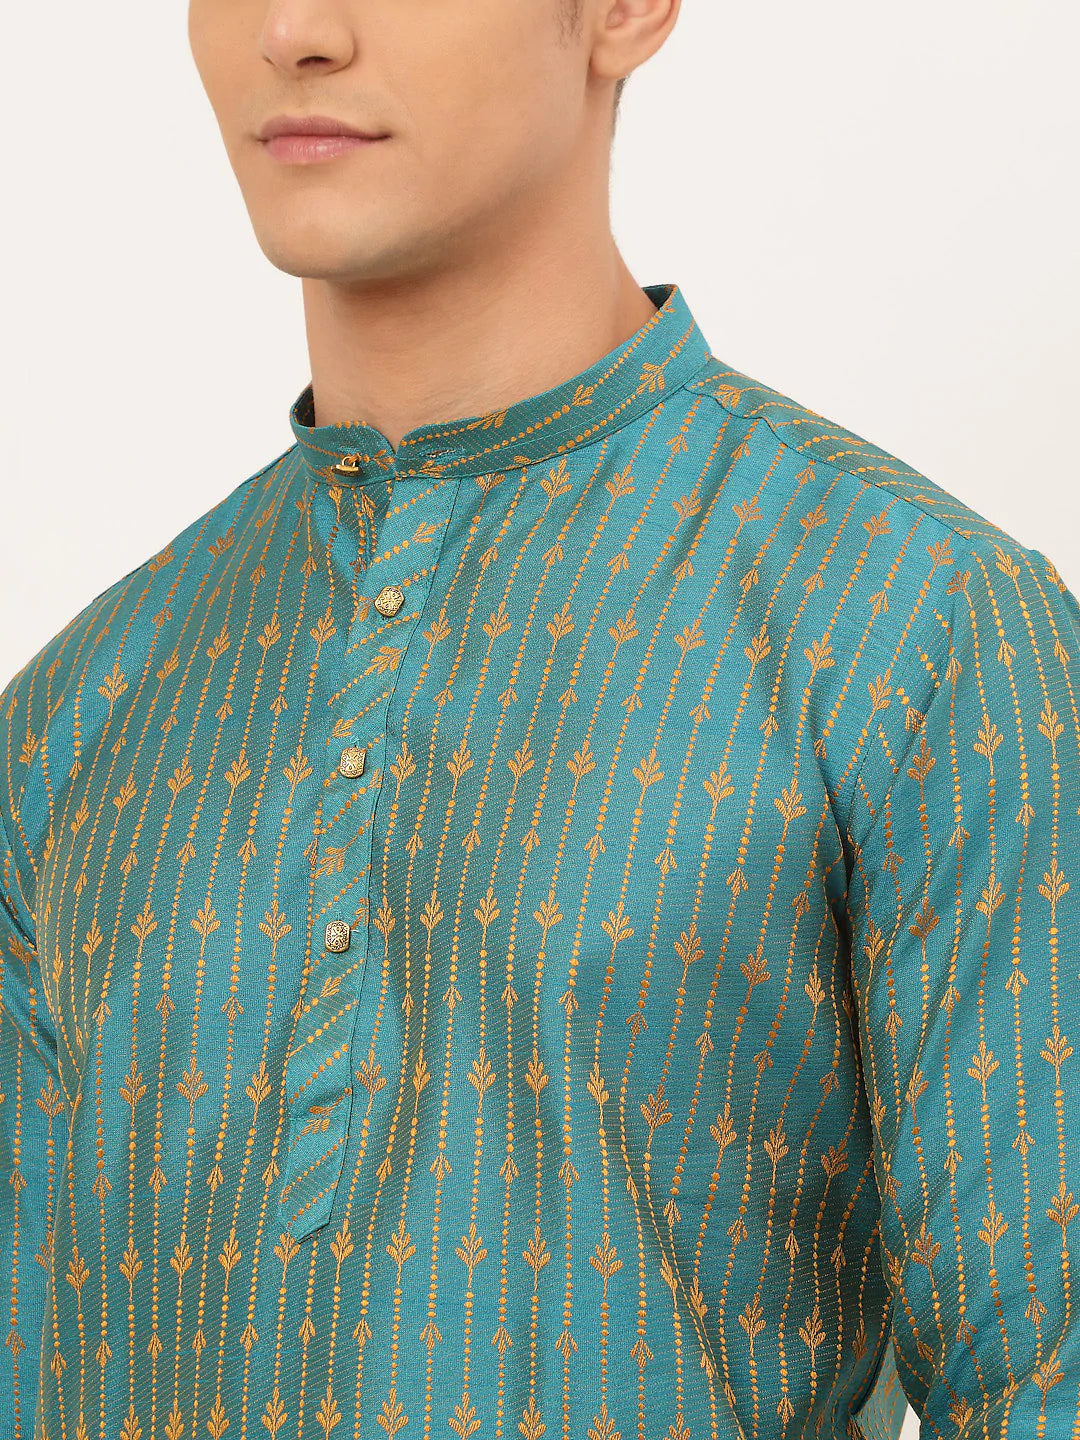 Jompers Men's Blue Embroidered Kurta Only ( KO 676 Blue )